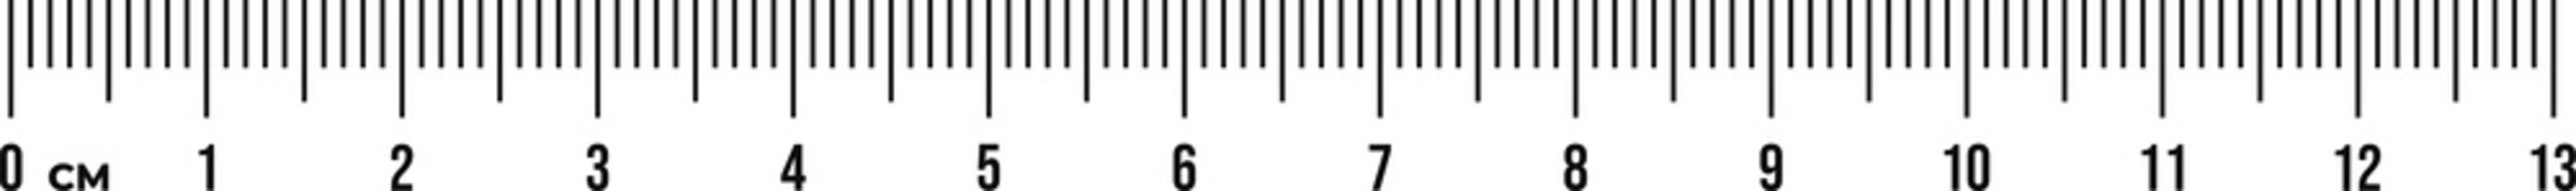 Ruler scale 13 cm. Centimeter scale for measuring